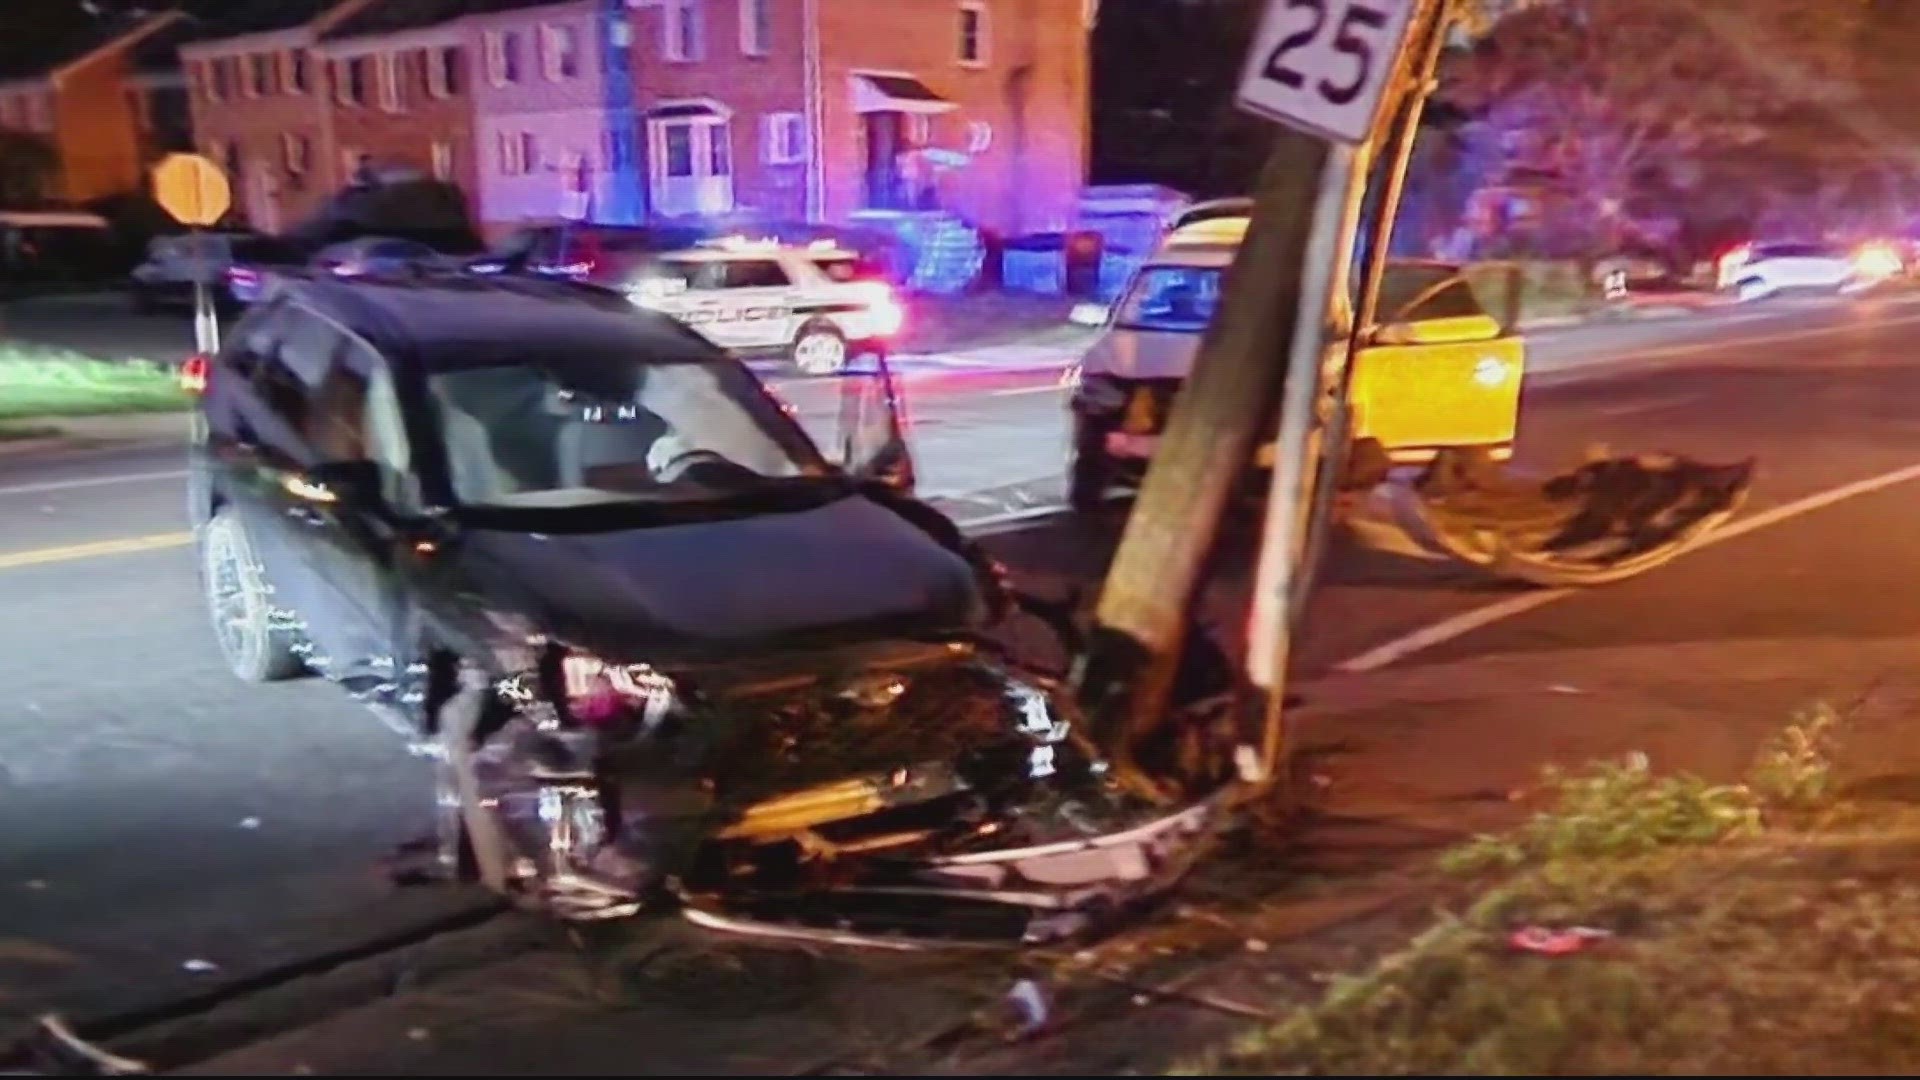 The cause for concern comes after a crash on Seminary Road near Filmore Avenue.